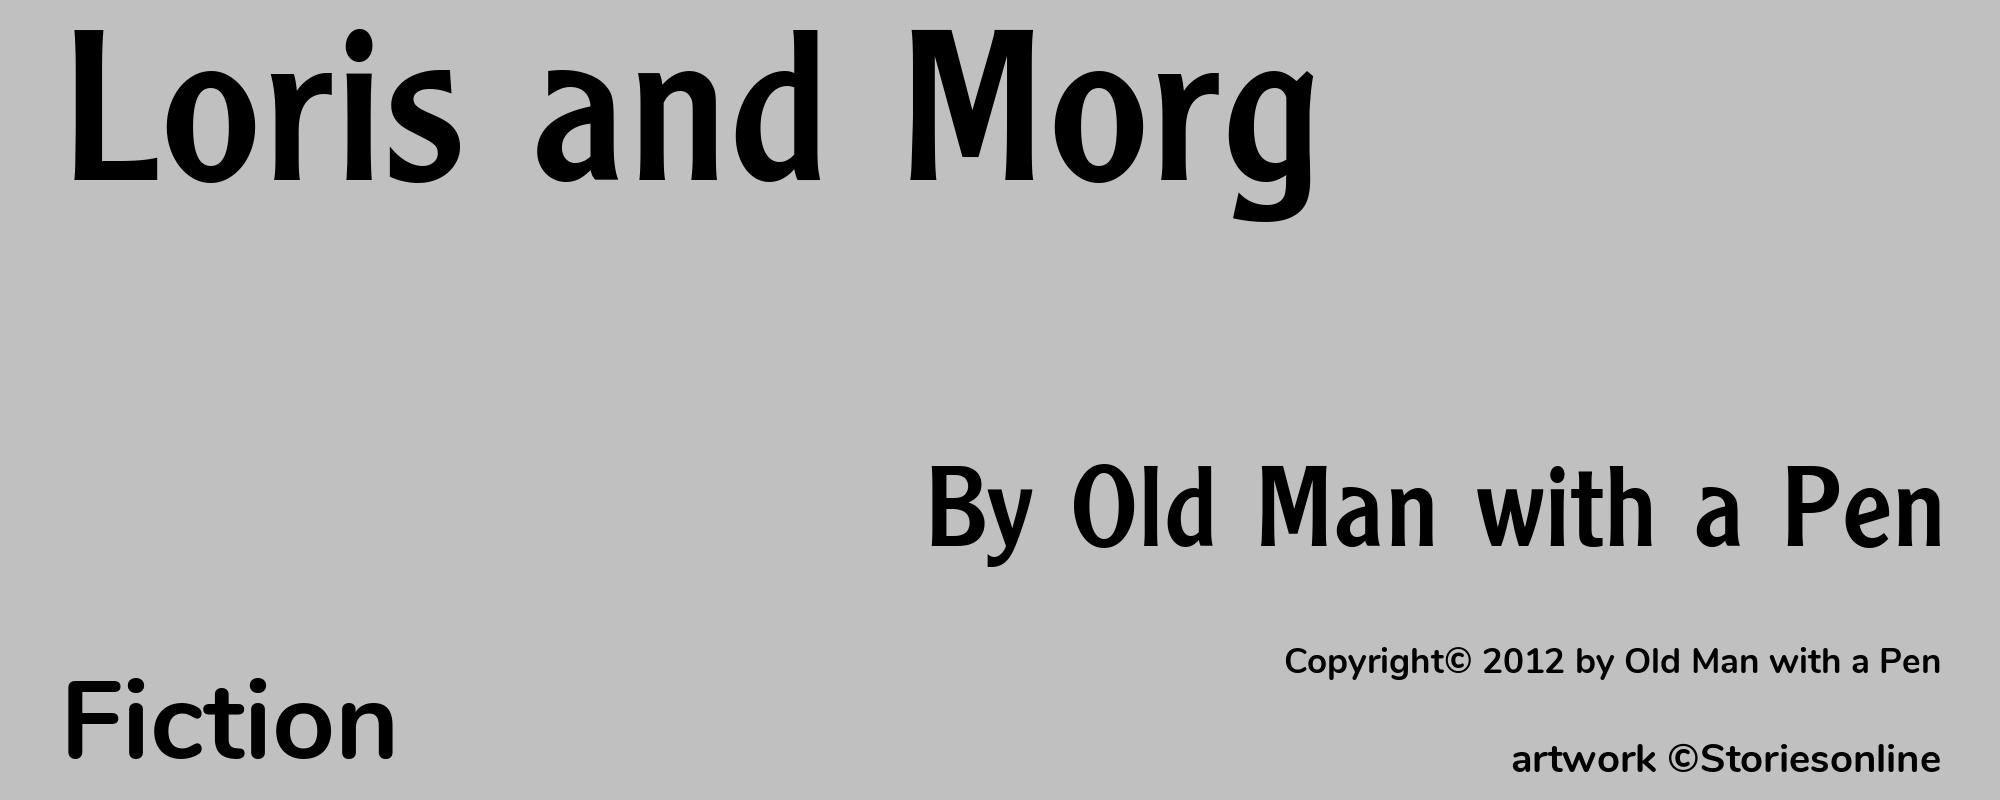 Loris and Morg - Cover